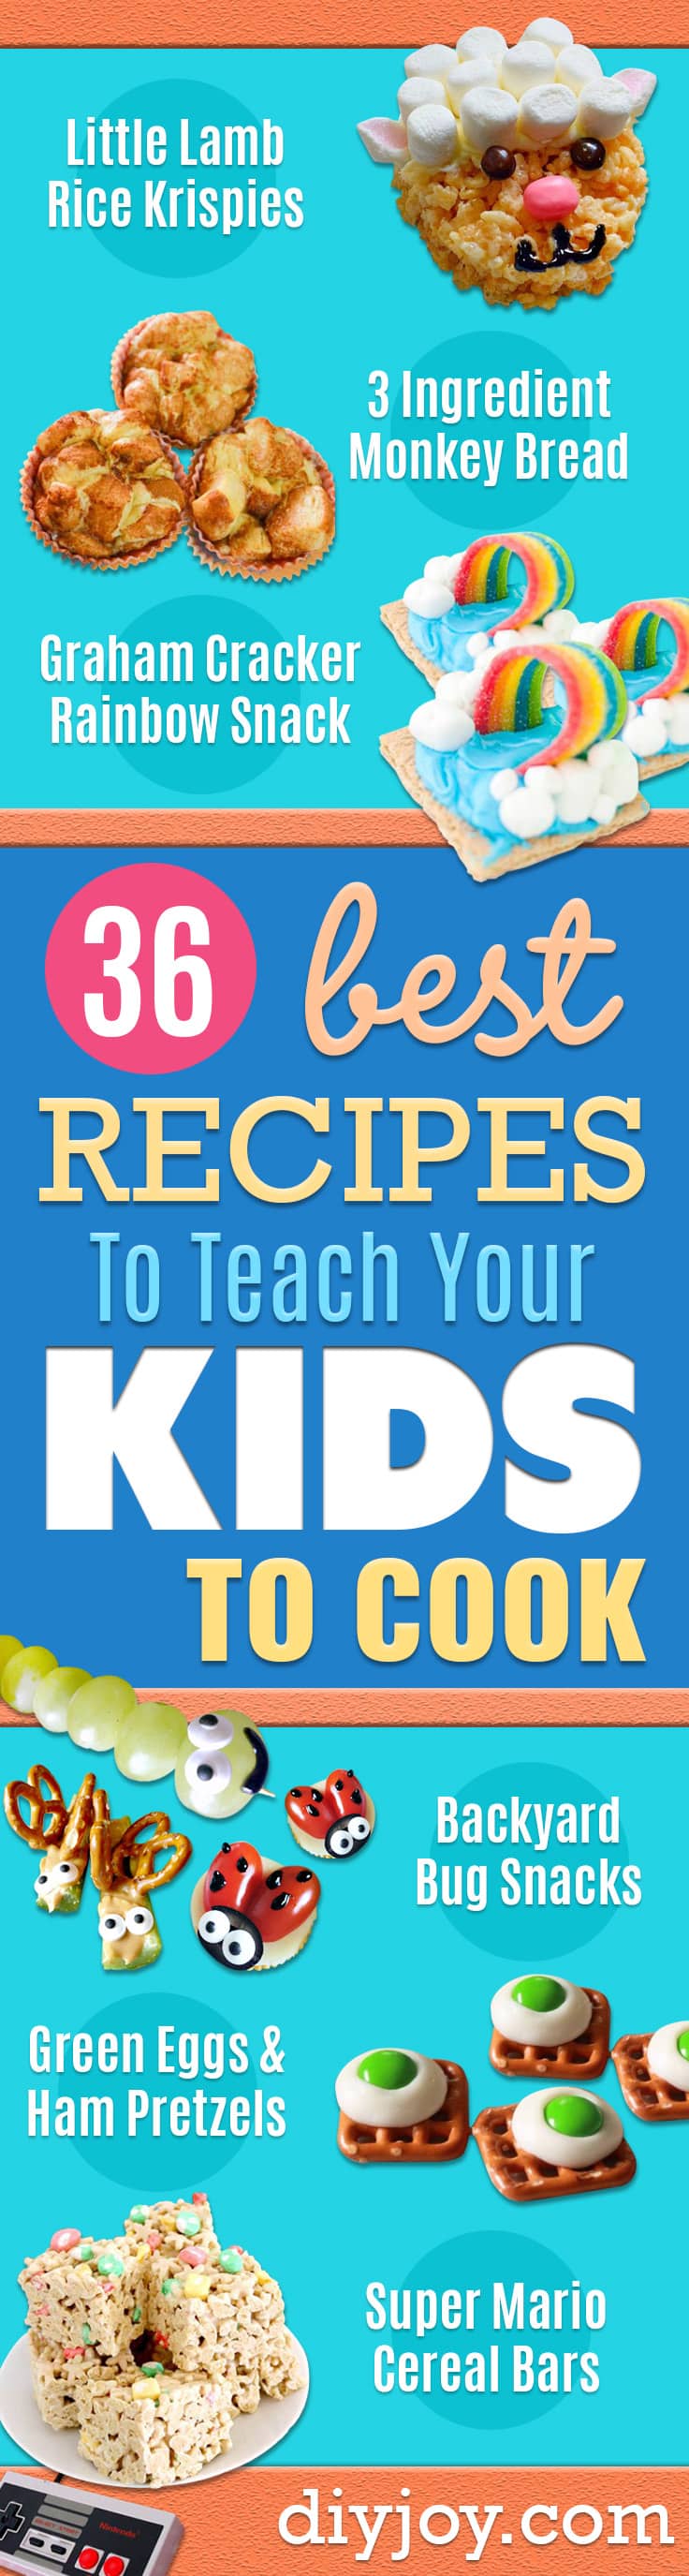 Best Recipes To Teach Your Kids To Cook - Easy Ideas To Show Children How to Prepare Food - Kid Friendly Recipes That Boys and Girls Can Make Themselves - No Bake, 5 Minute Foods, Healthy Snacks, Salads, Dips, Roll Ups, Vegetables and Simple Desserts - Recipes To Learn How To Make Fun Food http://diyjoy.com/best-recipes-teach-kids-to-cook